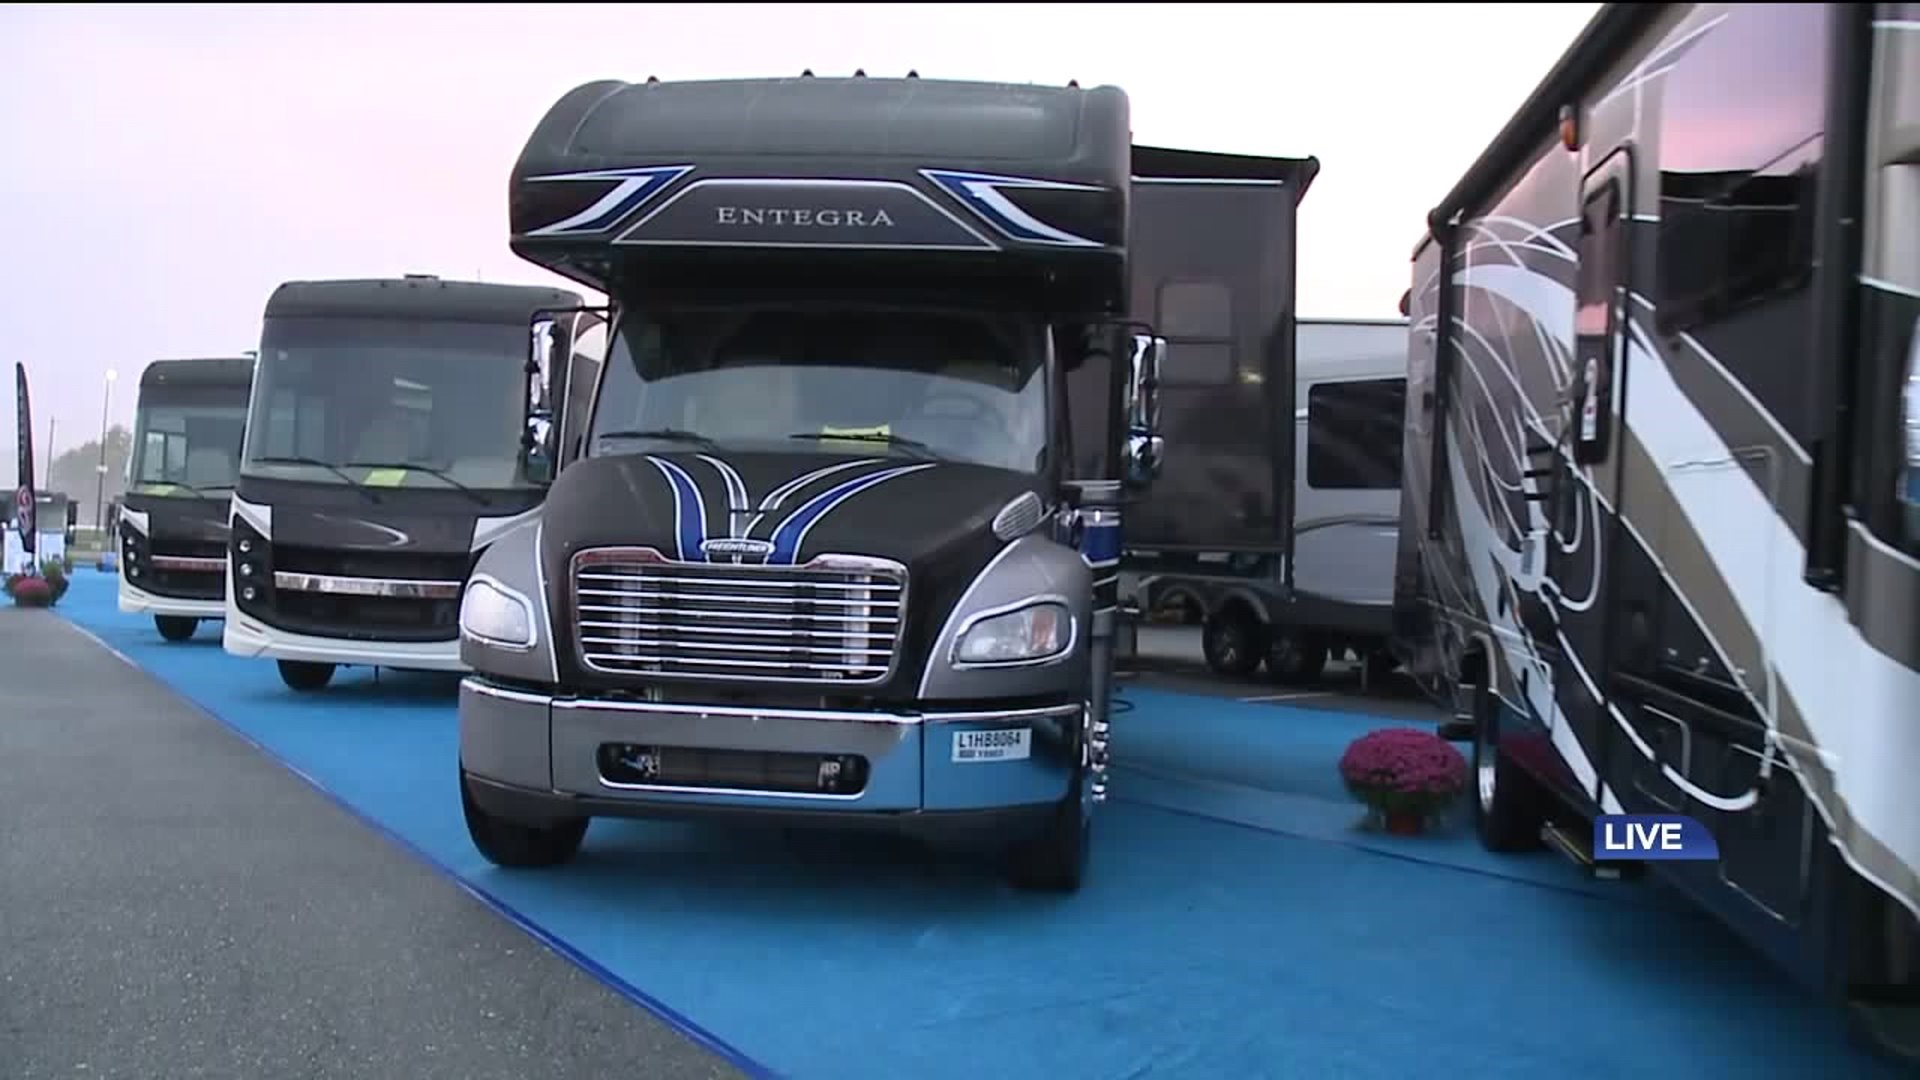 Taking ‘America’s Largest RV Show’ for a Spin